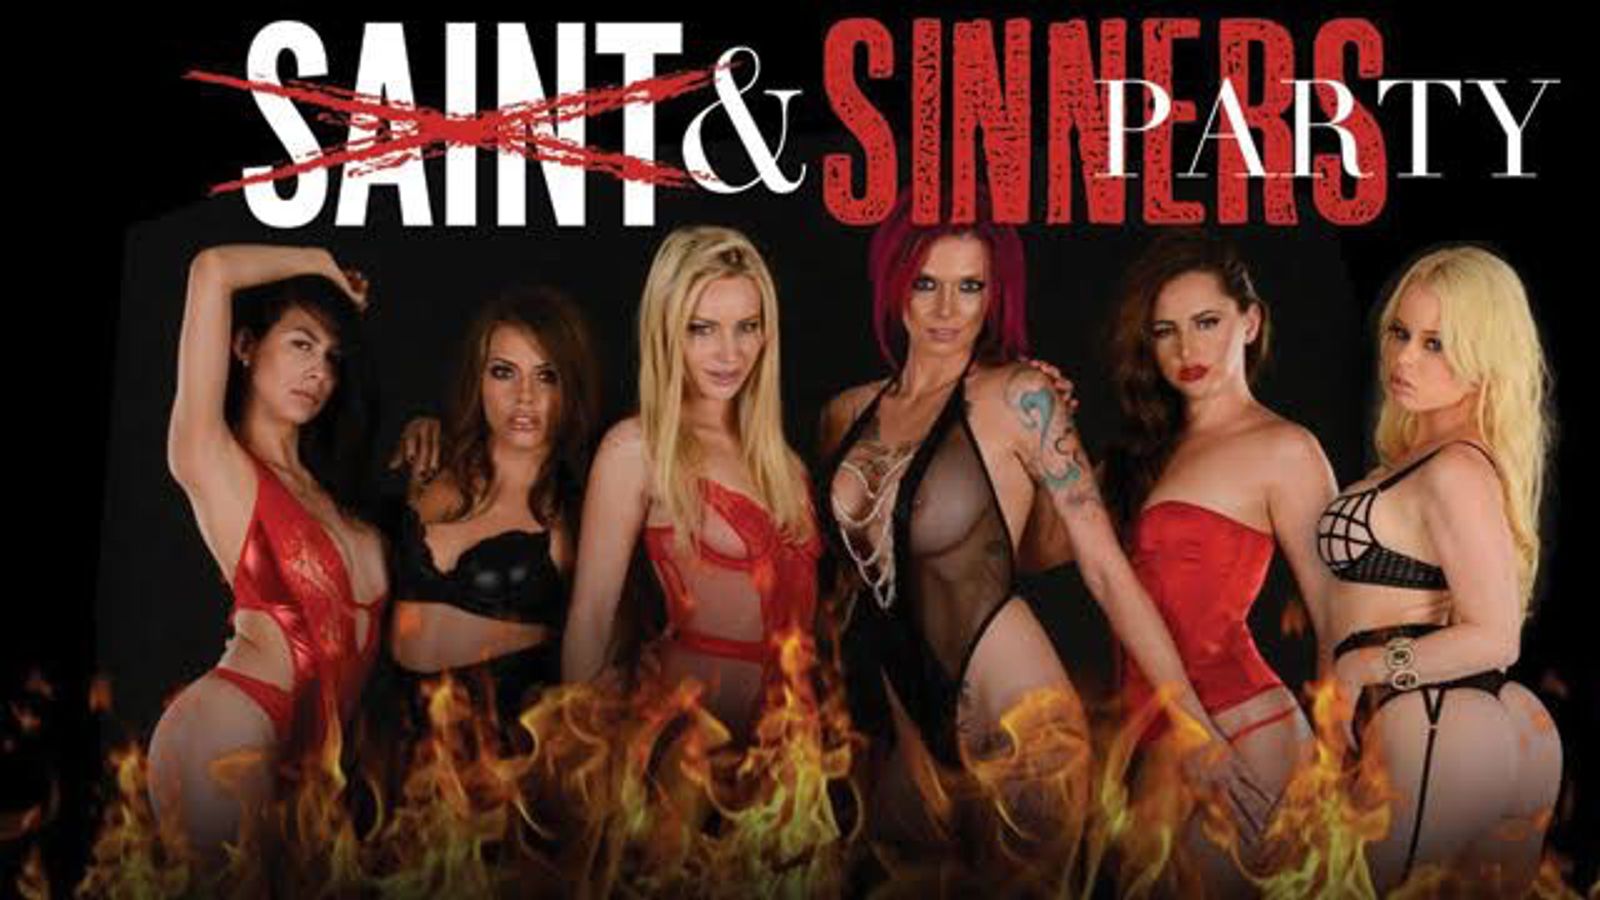 Saint & Sinners Party Added To AEE 2016 Party Lineup